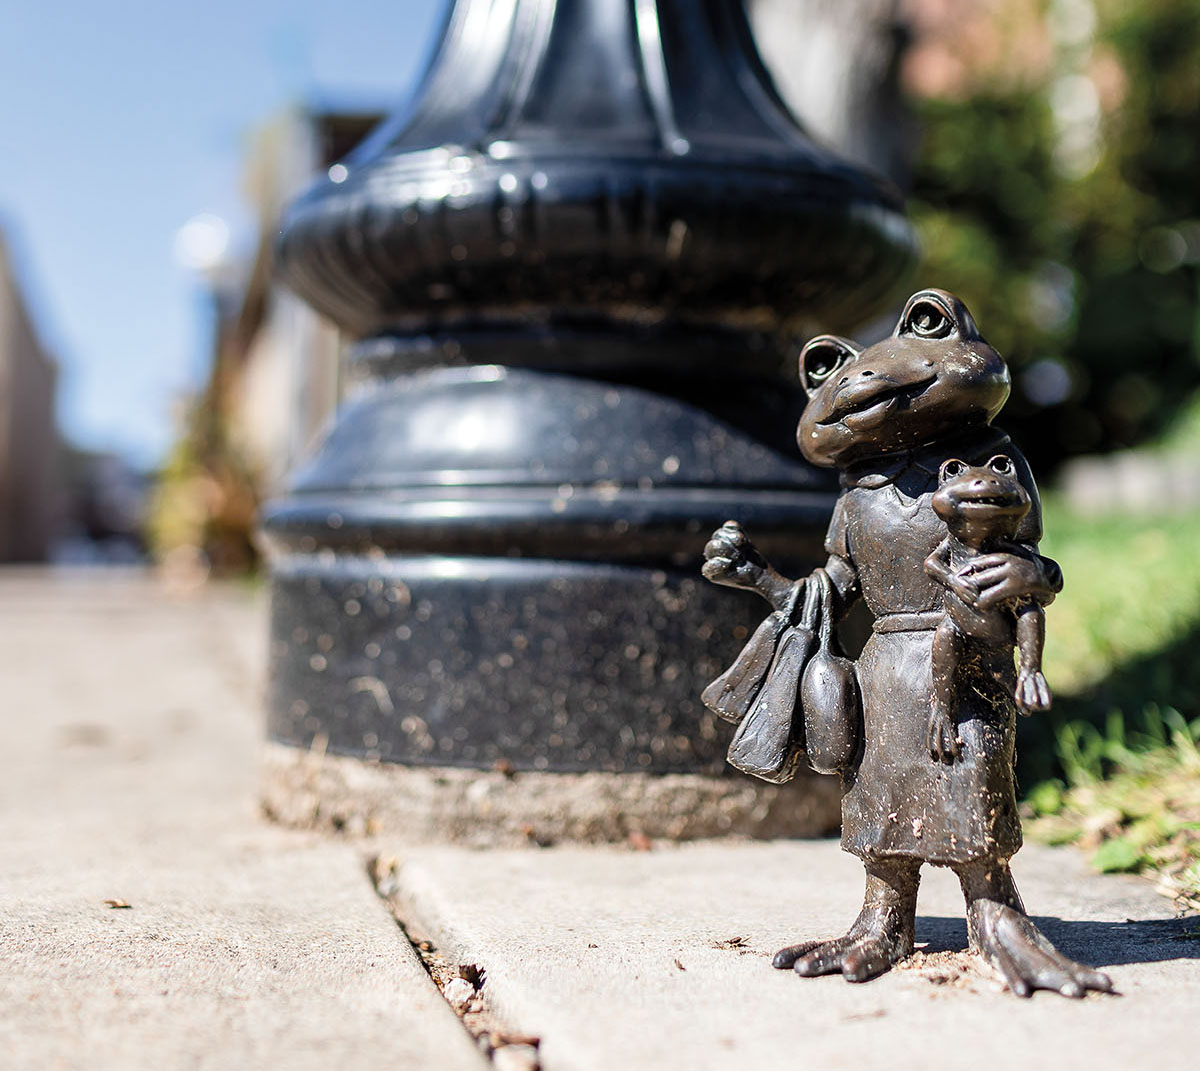 A bronze sculpture of a frog holding a smaller frog next to the base of a lightpost on a concrete slab